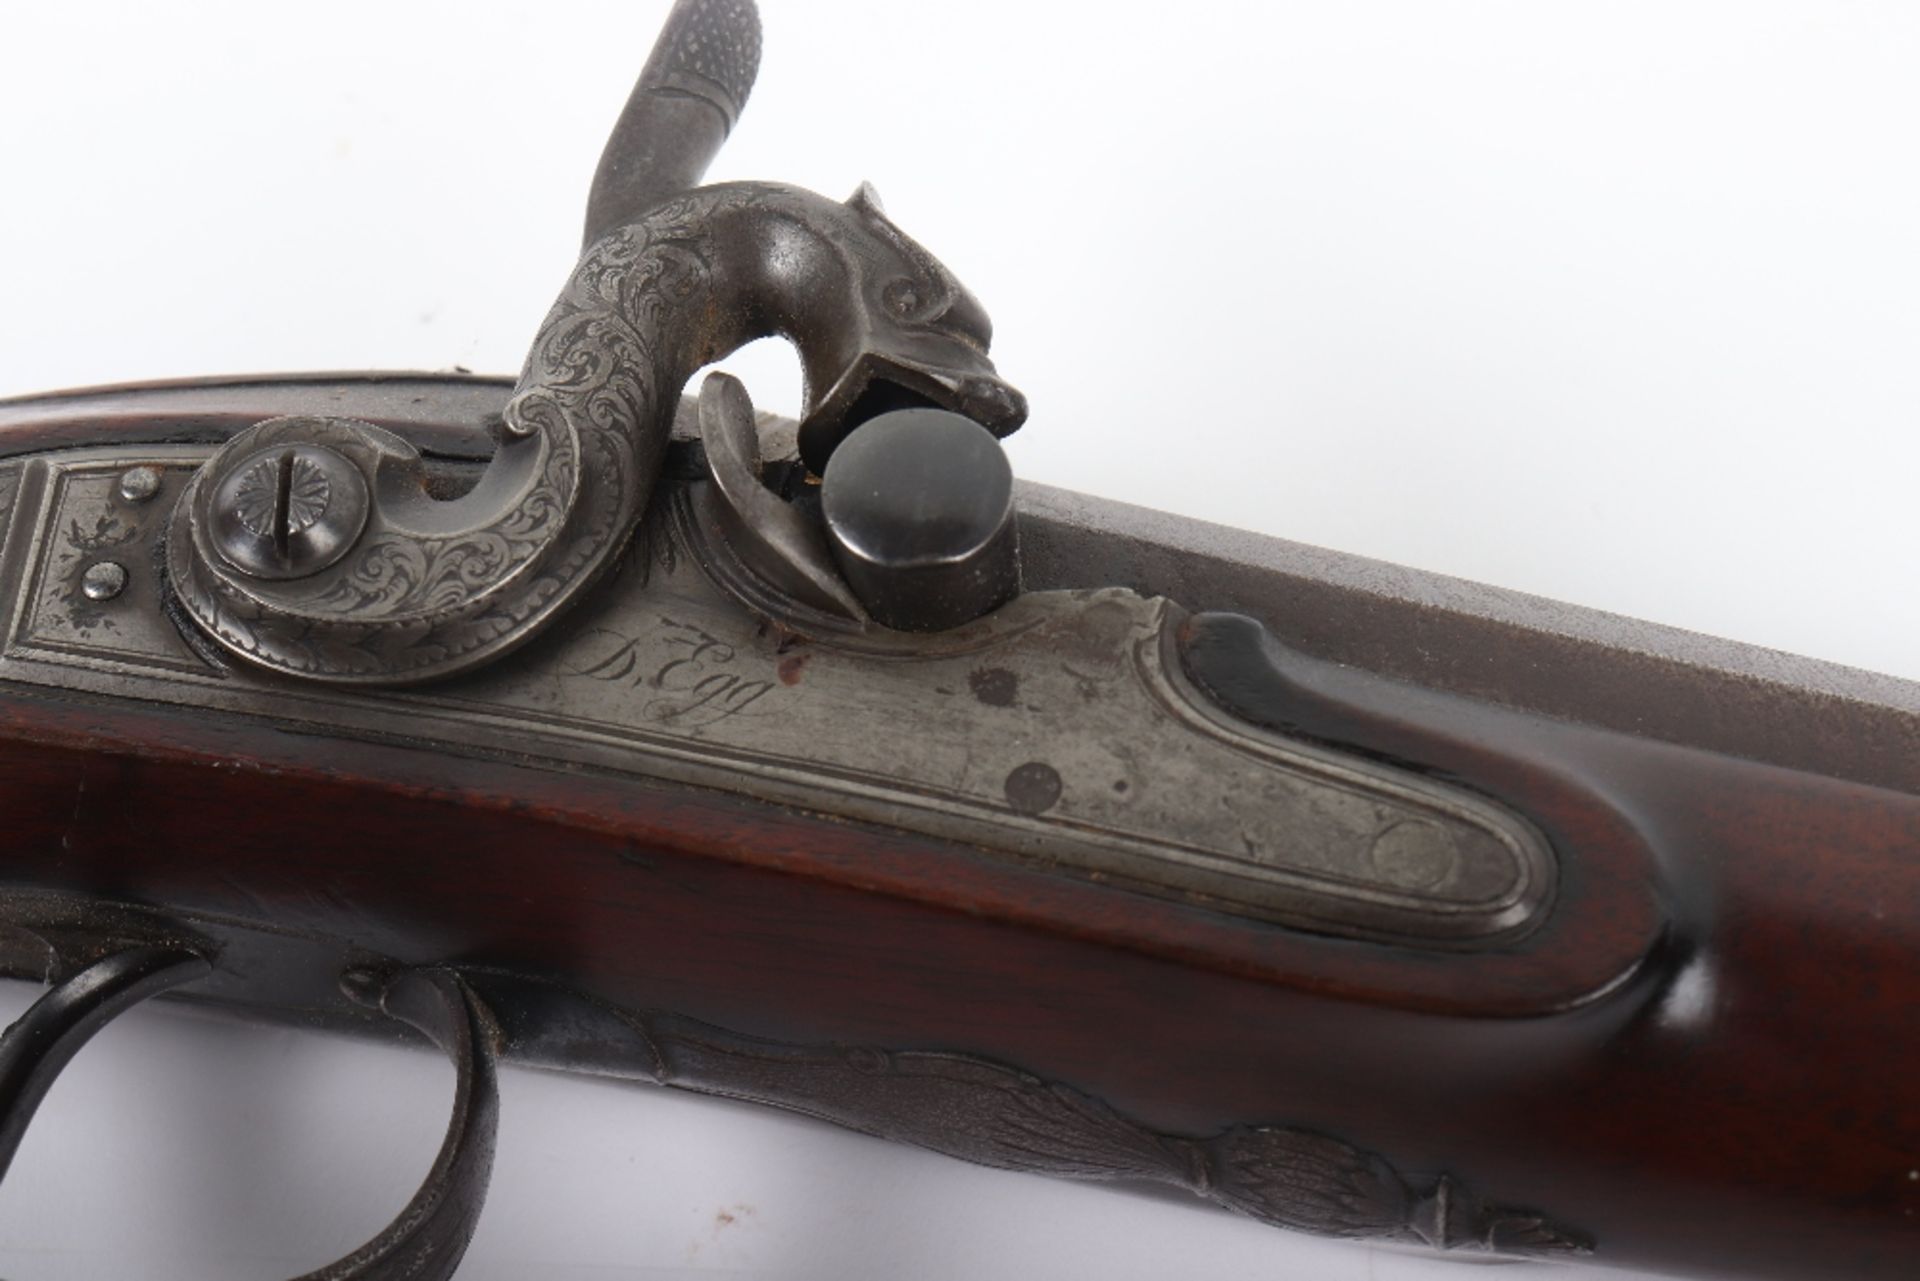 16-Bore Percussion Sporting Gun by D. Egg, Late 18th Century - Image 5 of 15